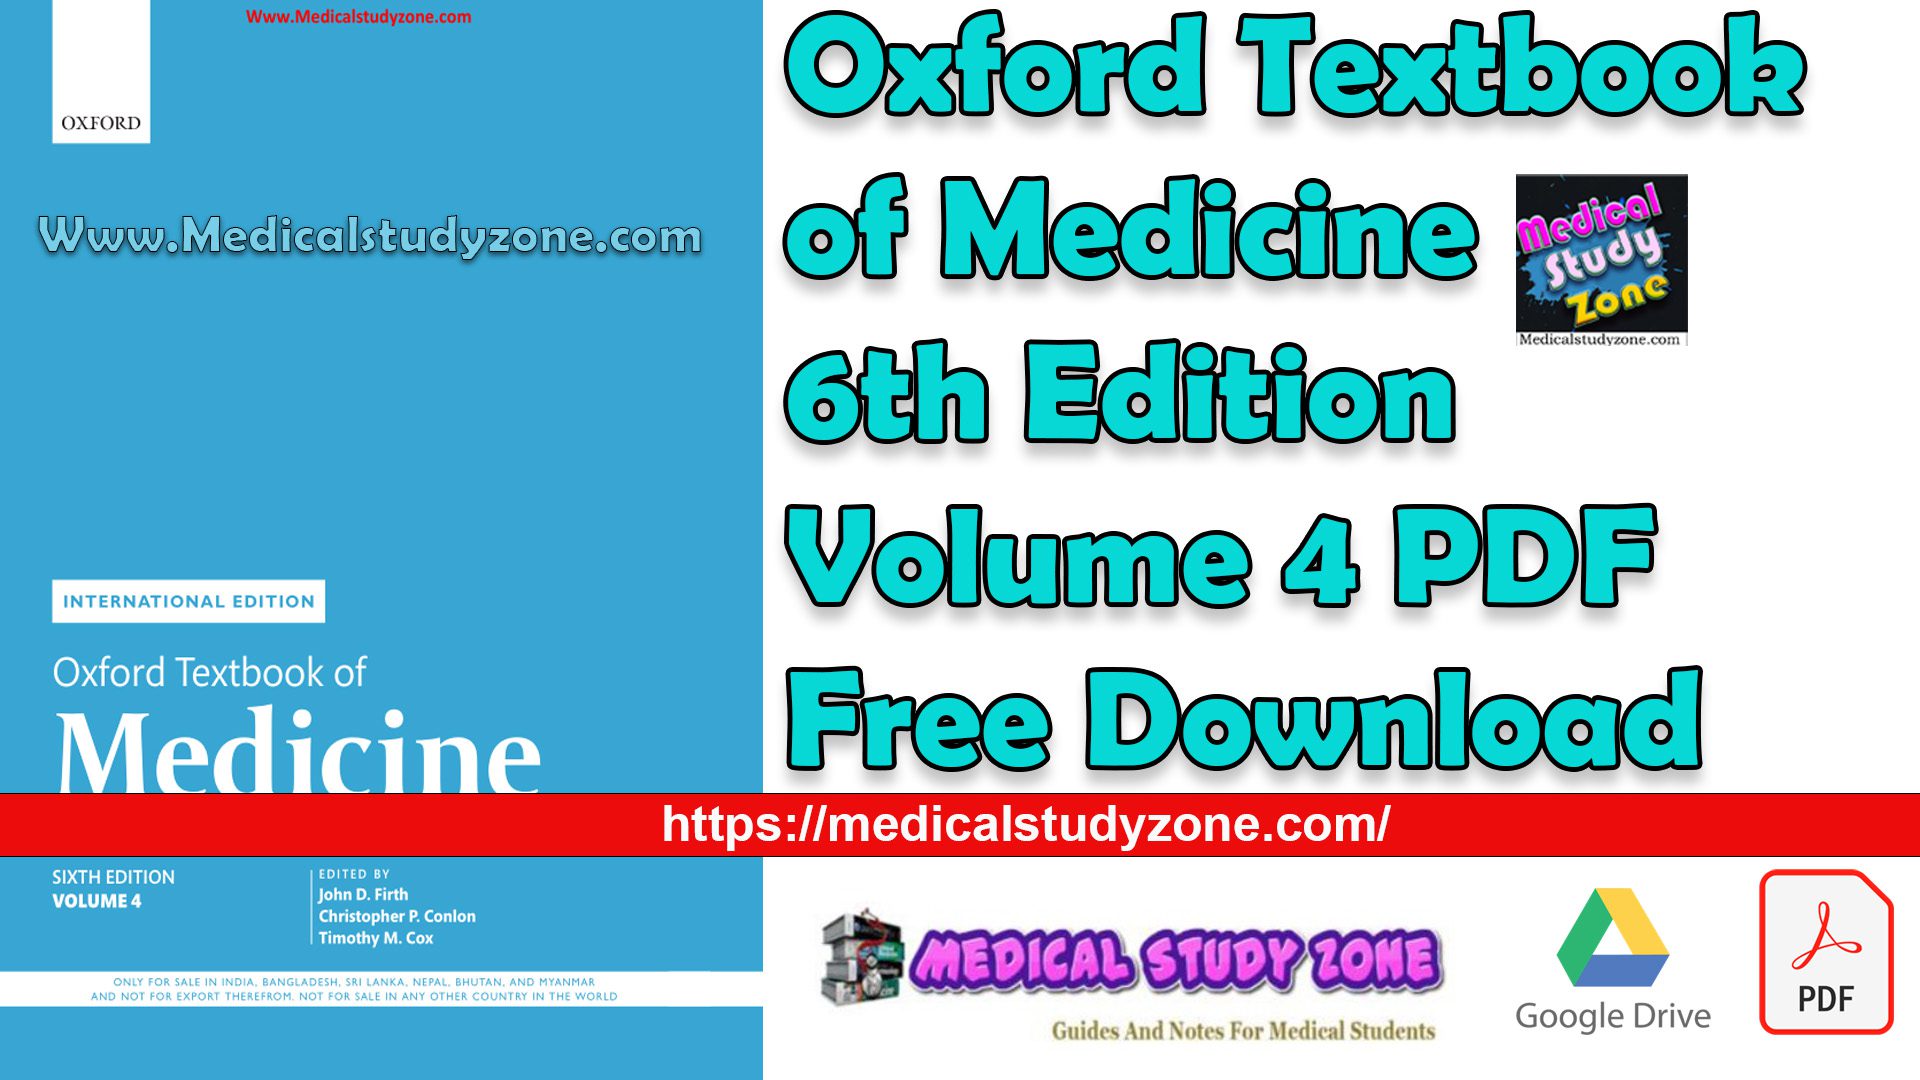 Oxford Textbook of Medicine 6th Edition Volume 4 PDF Free Download